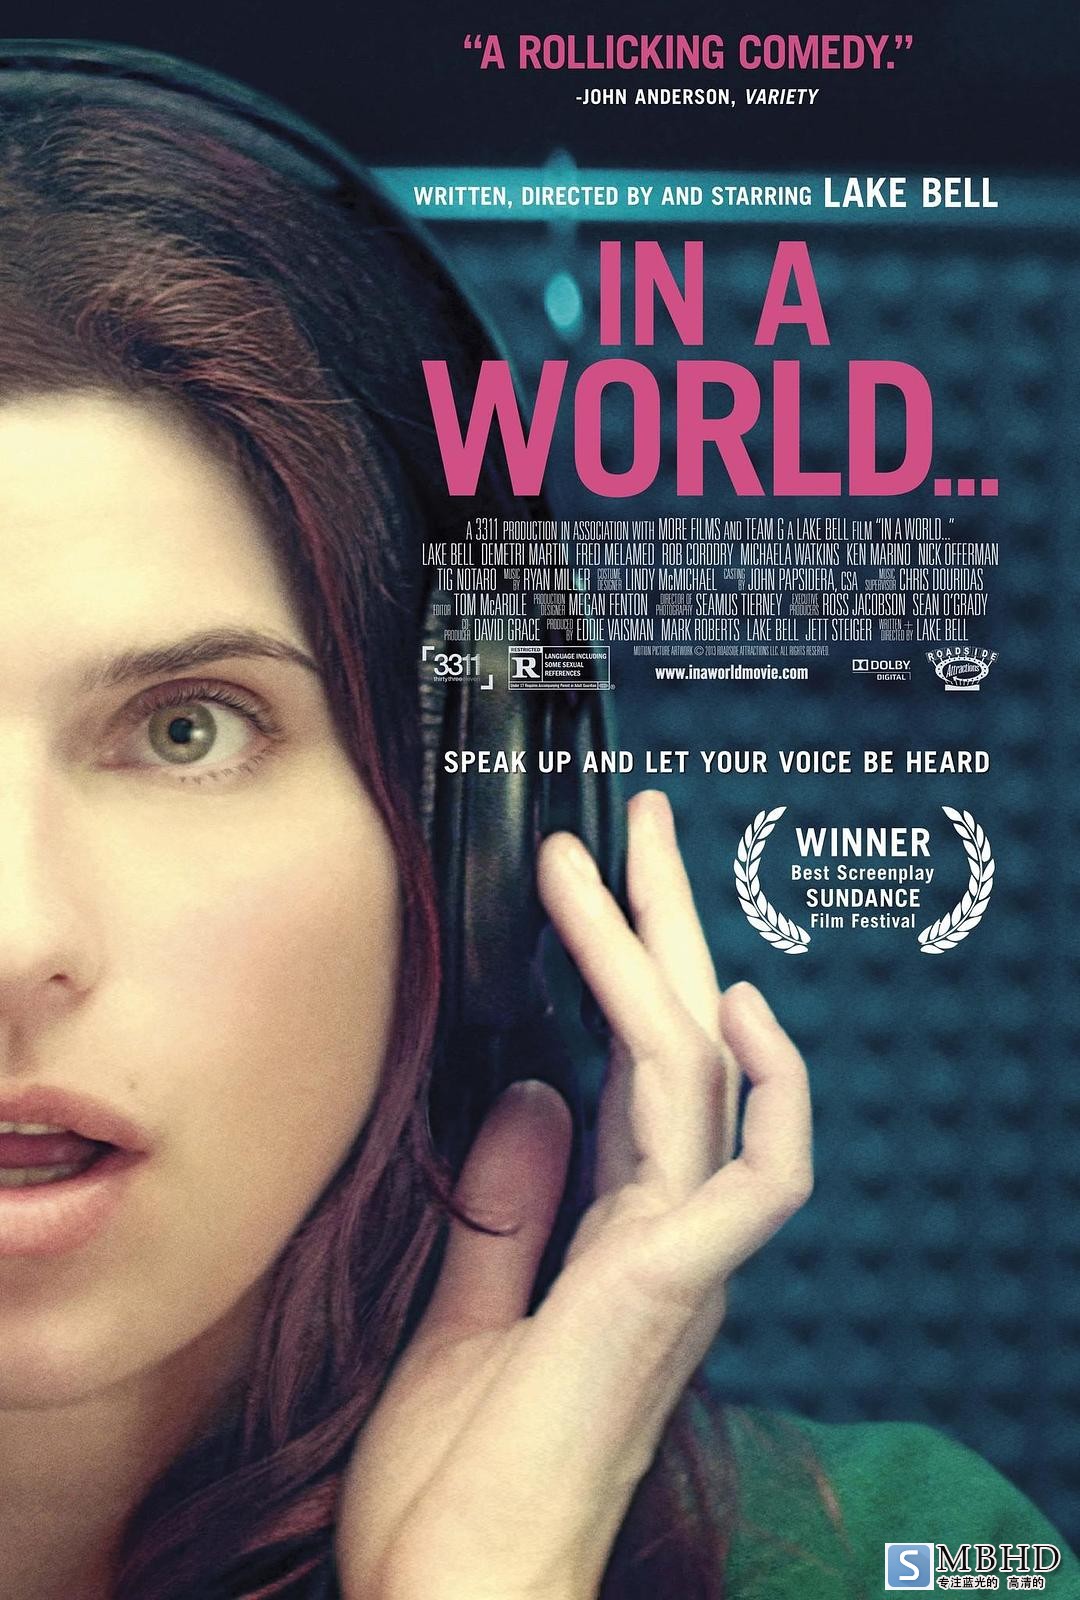 / In.A.World.2013.LiMiTED.1080p.BluRay.x264-iMMORTALs 6.56GB-1.png